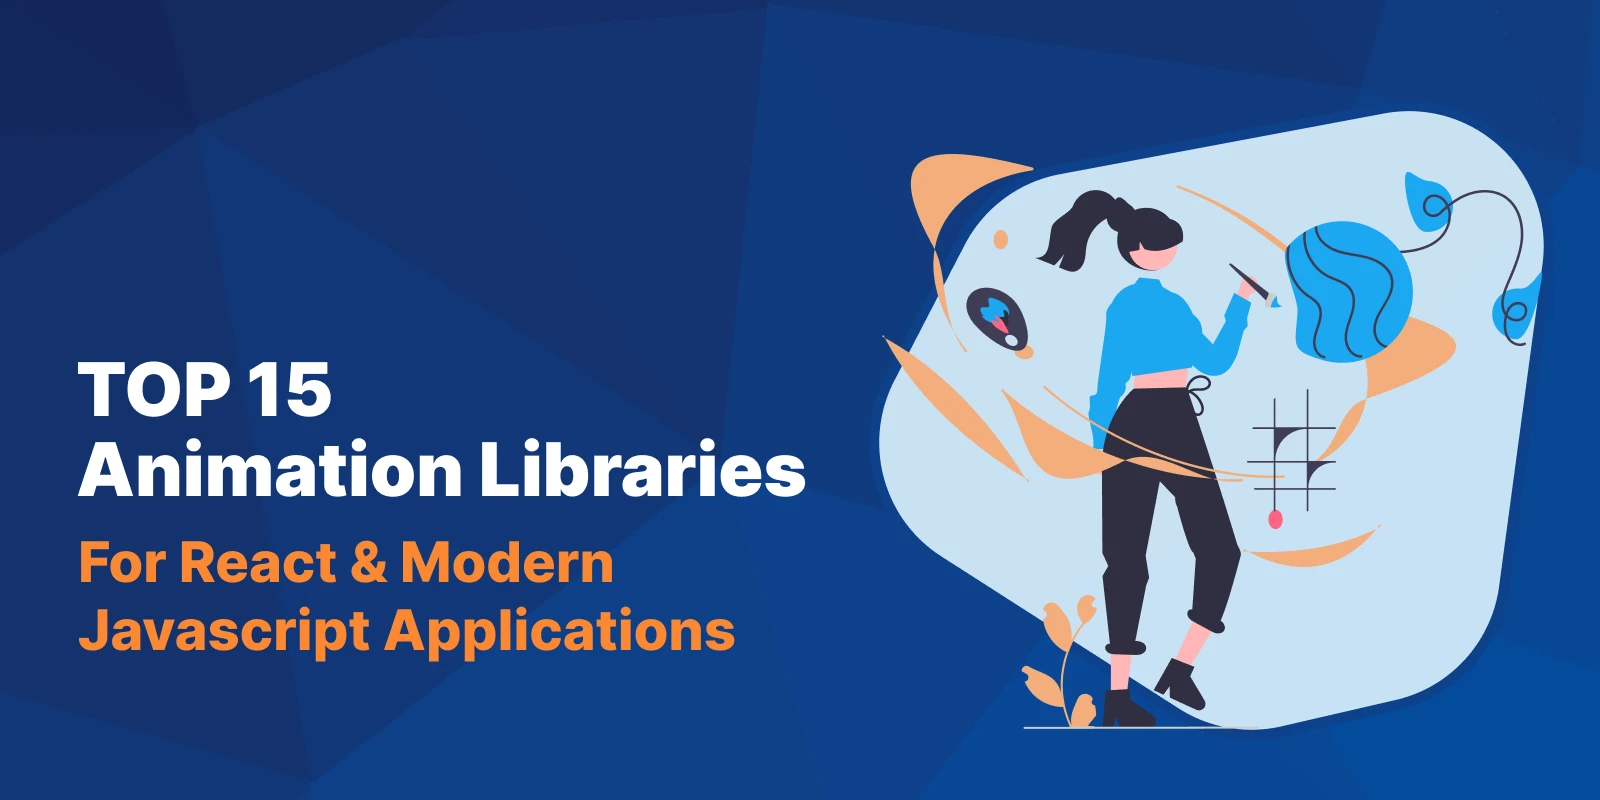 Top 15 Animation Libraries for React & Modern Web Apps